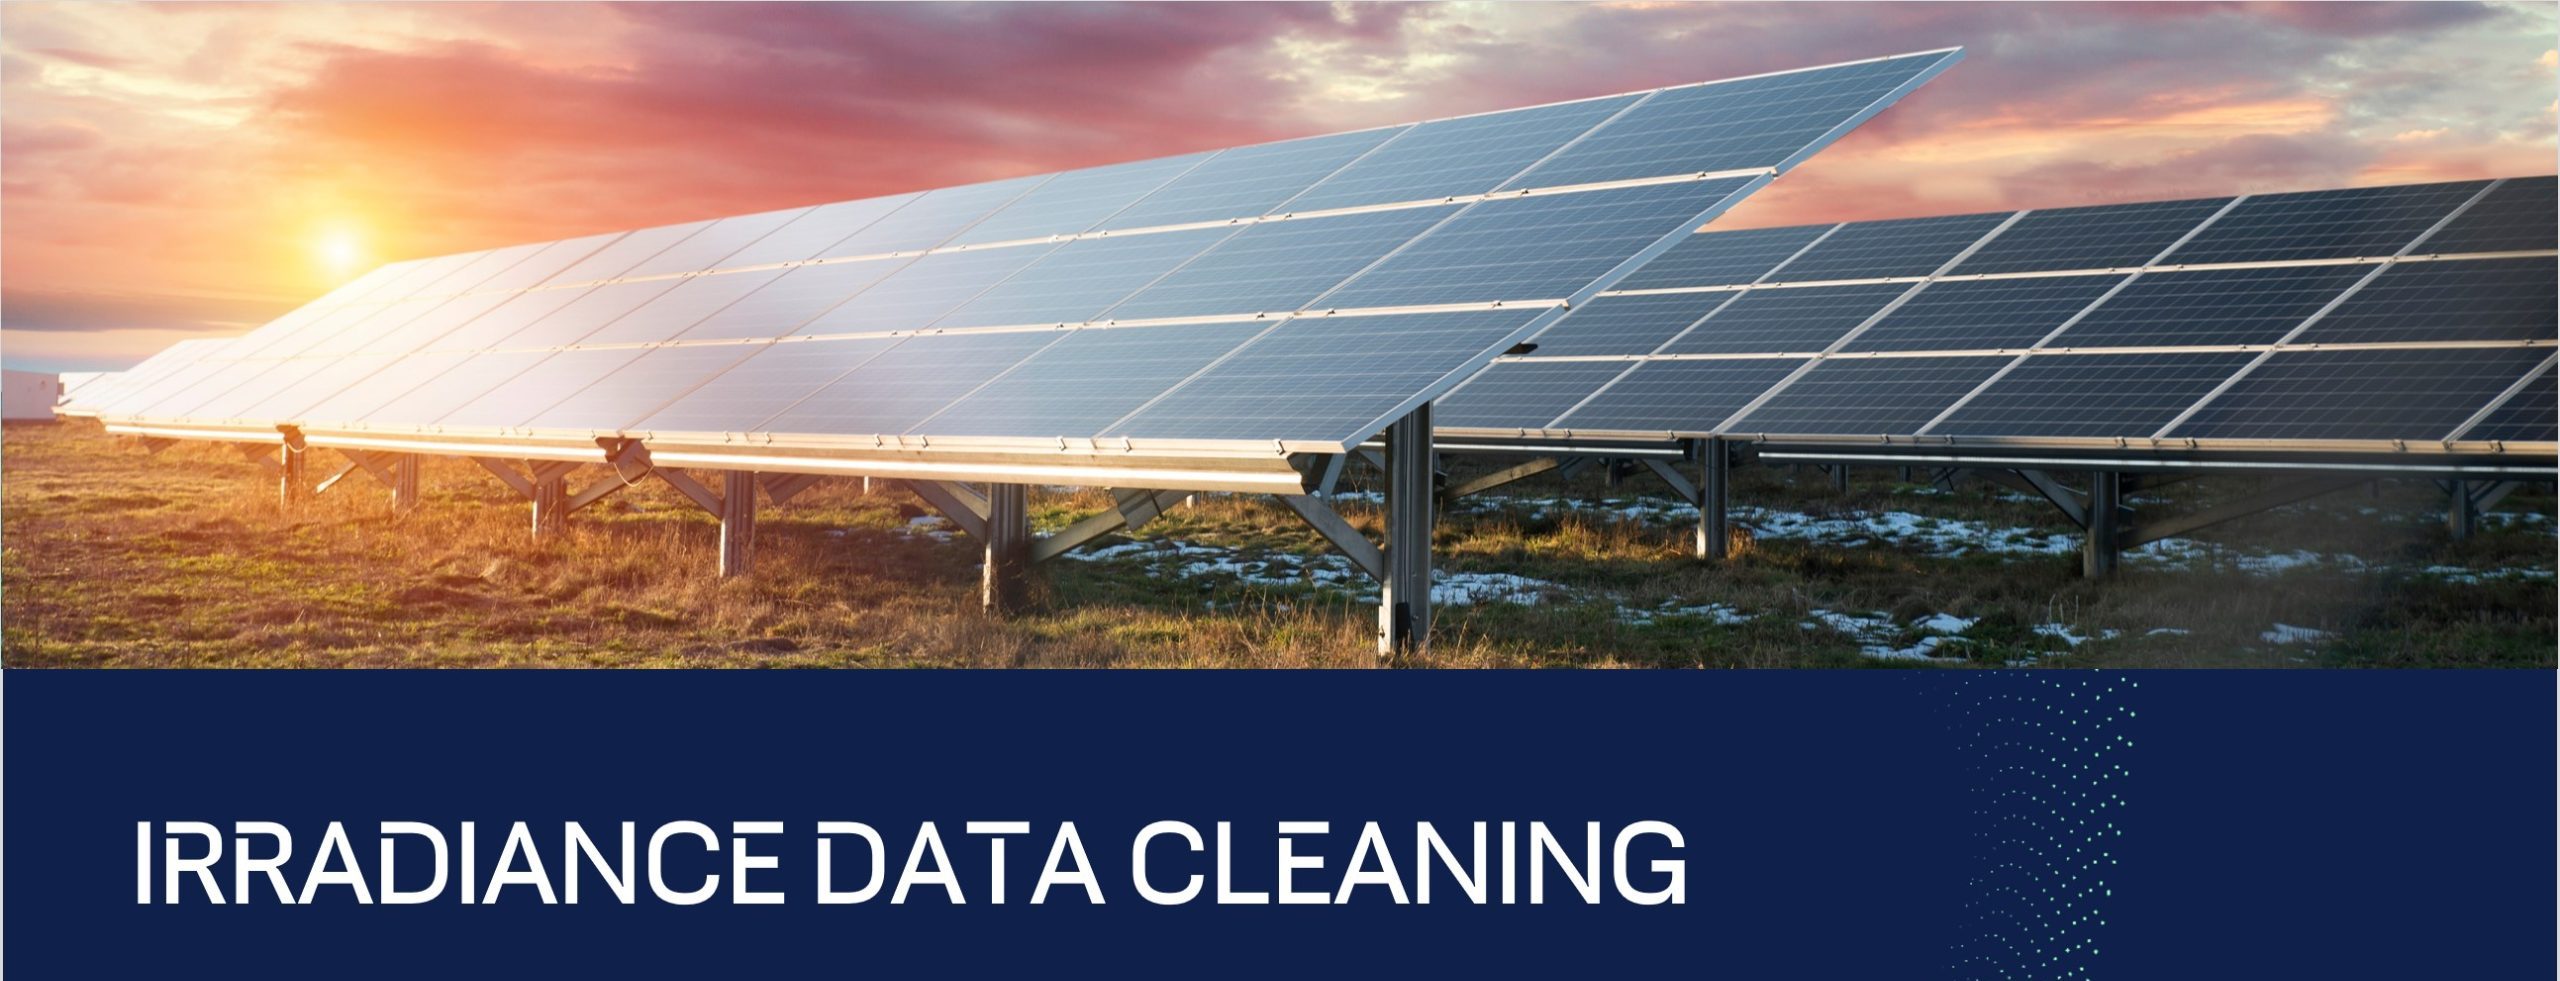 Irradiance Data Cleaning